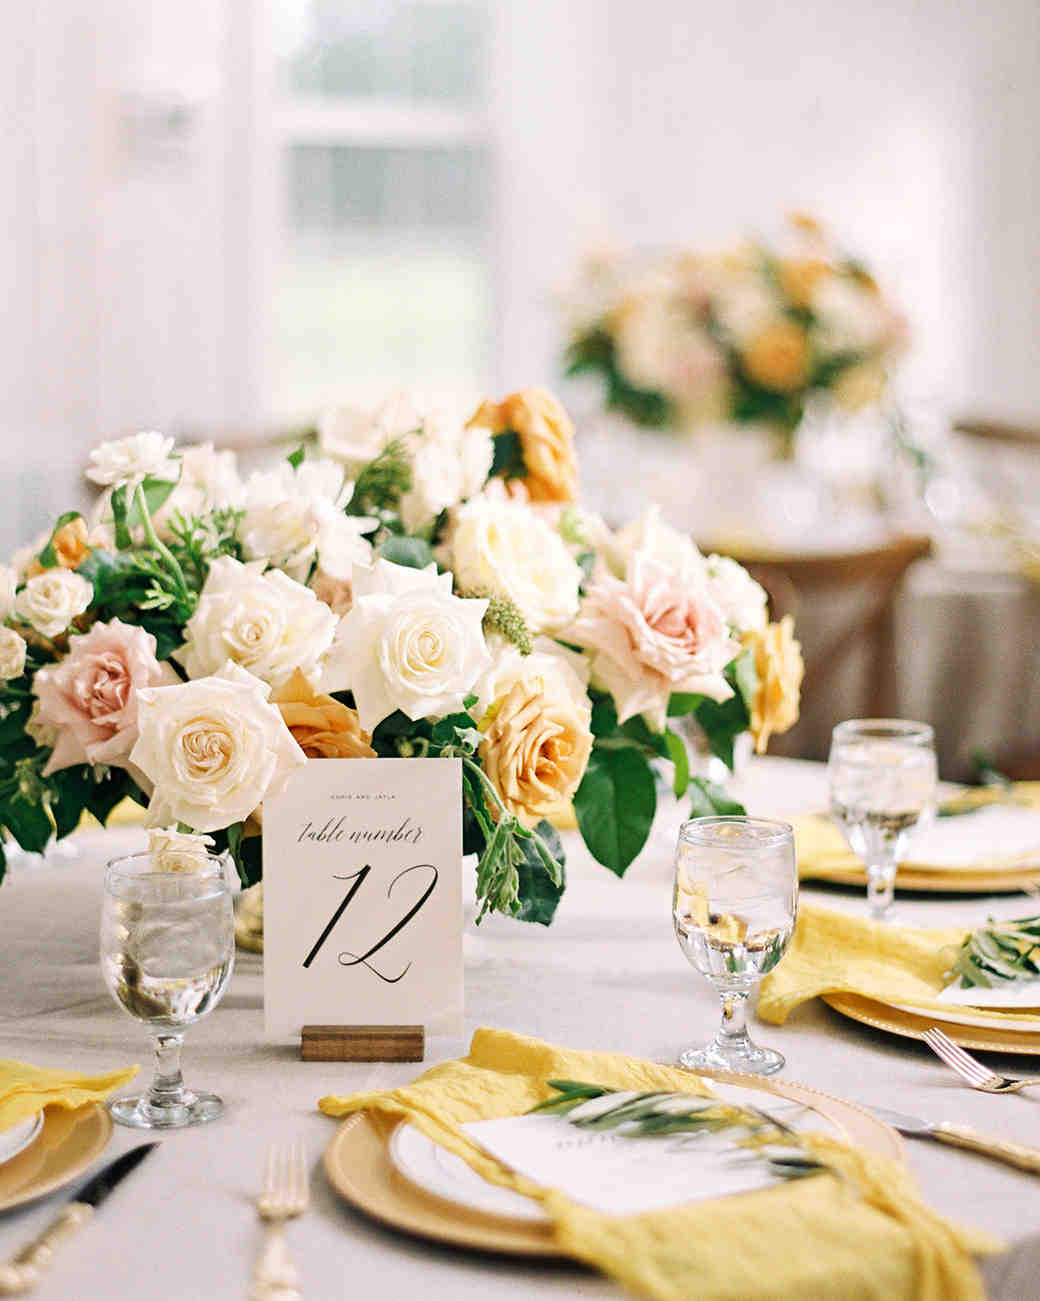 24 Yellow Wedding Ideas That Will Make Your Day Bright And Cheery